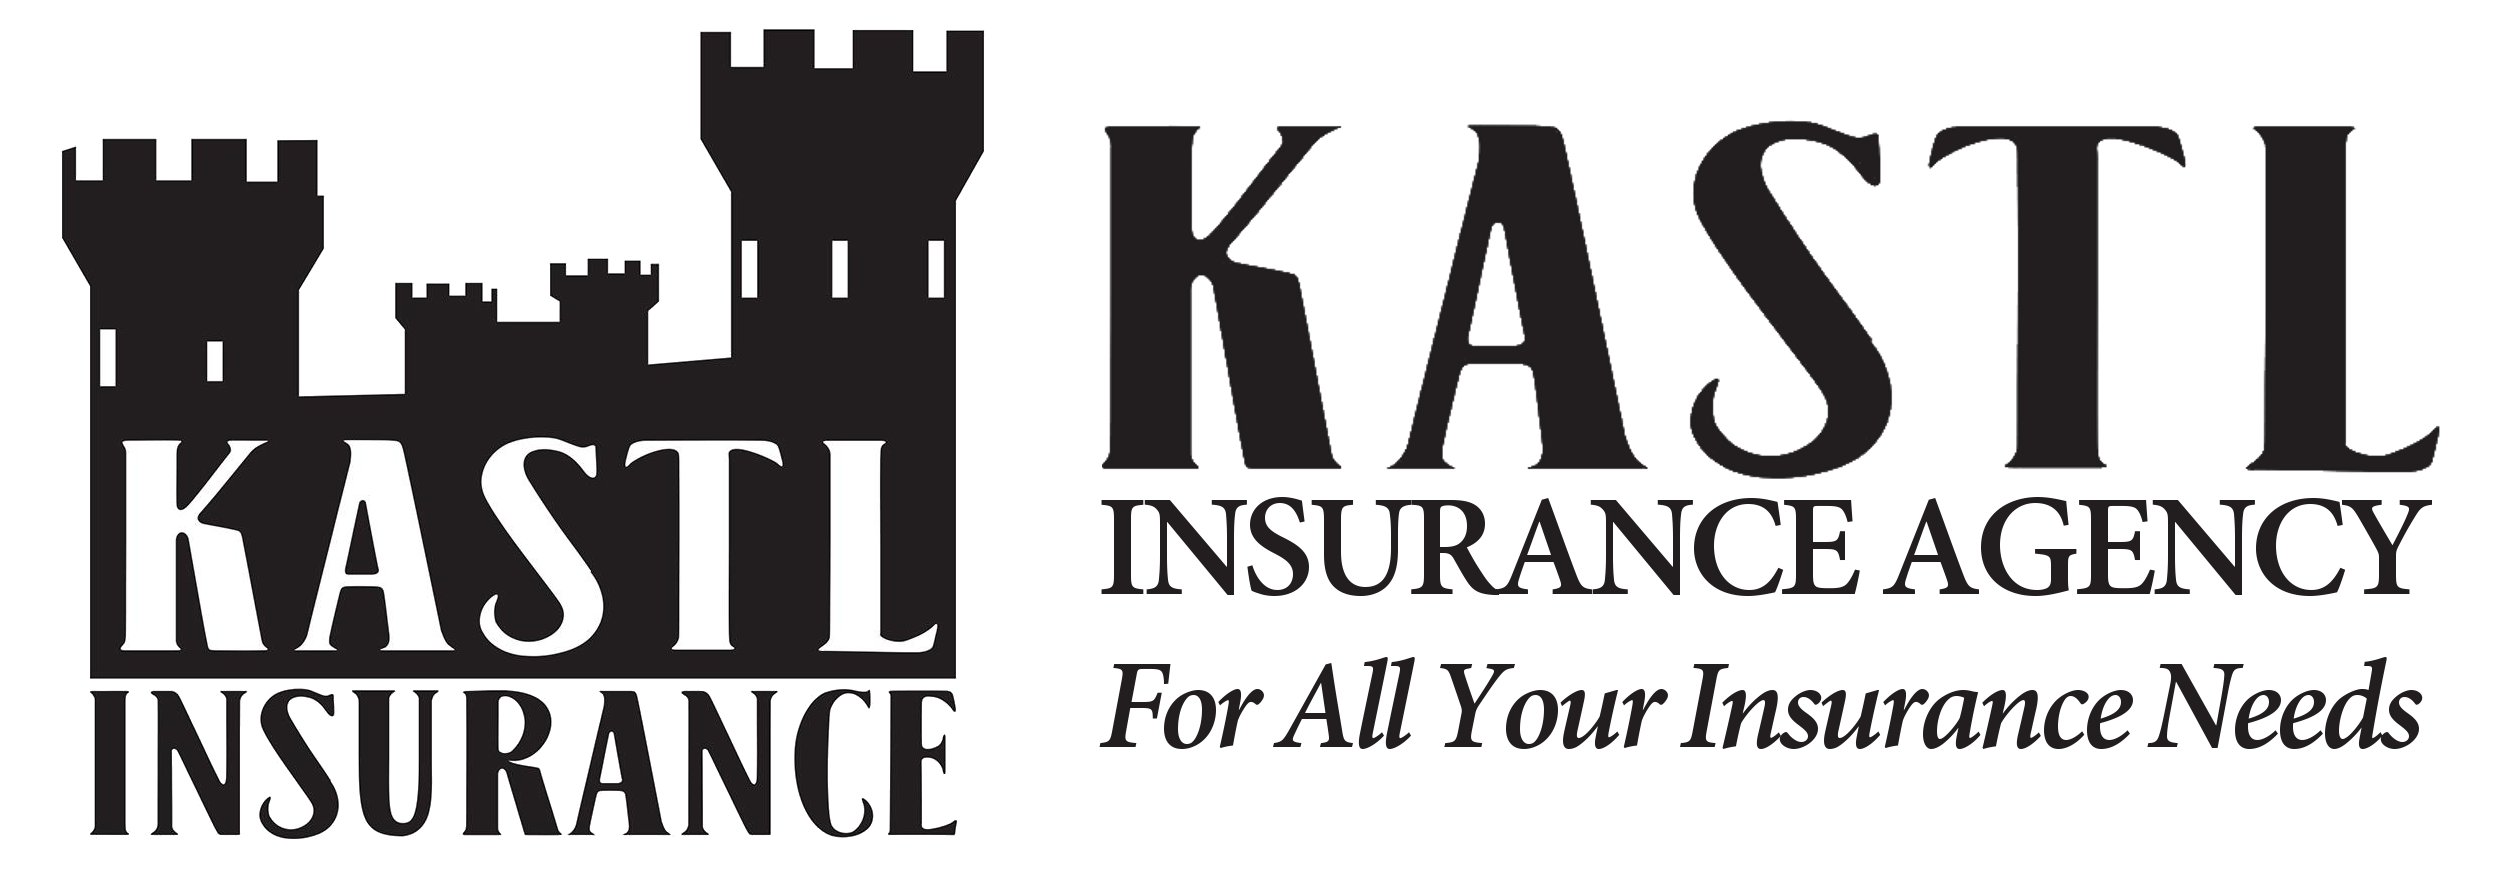 KASTL Insurance Agency - For all your insurance needs.